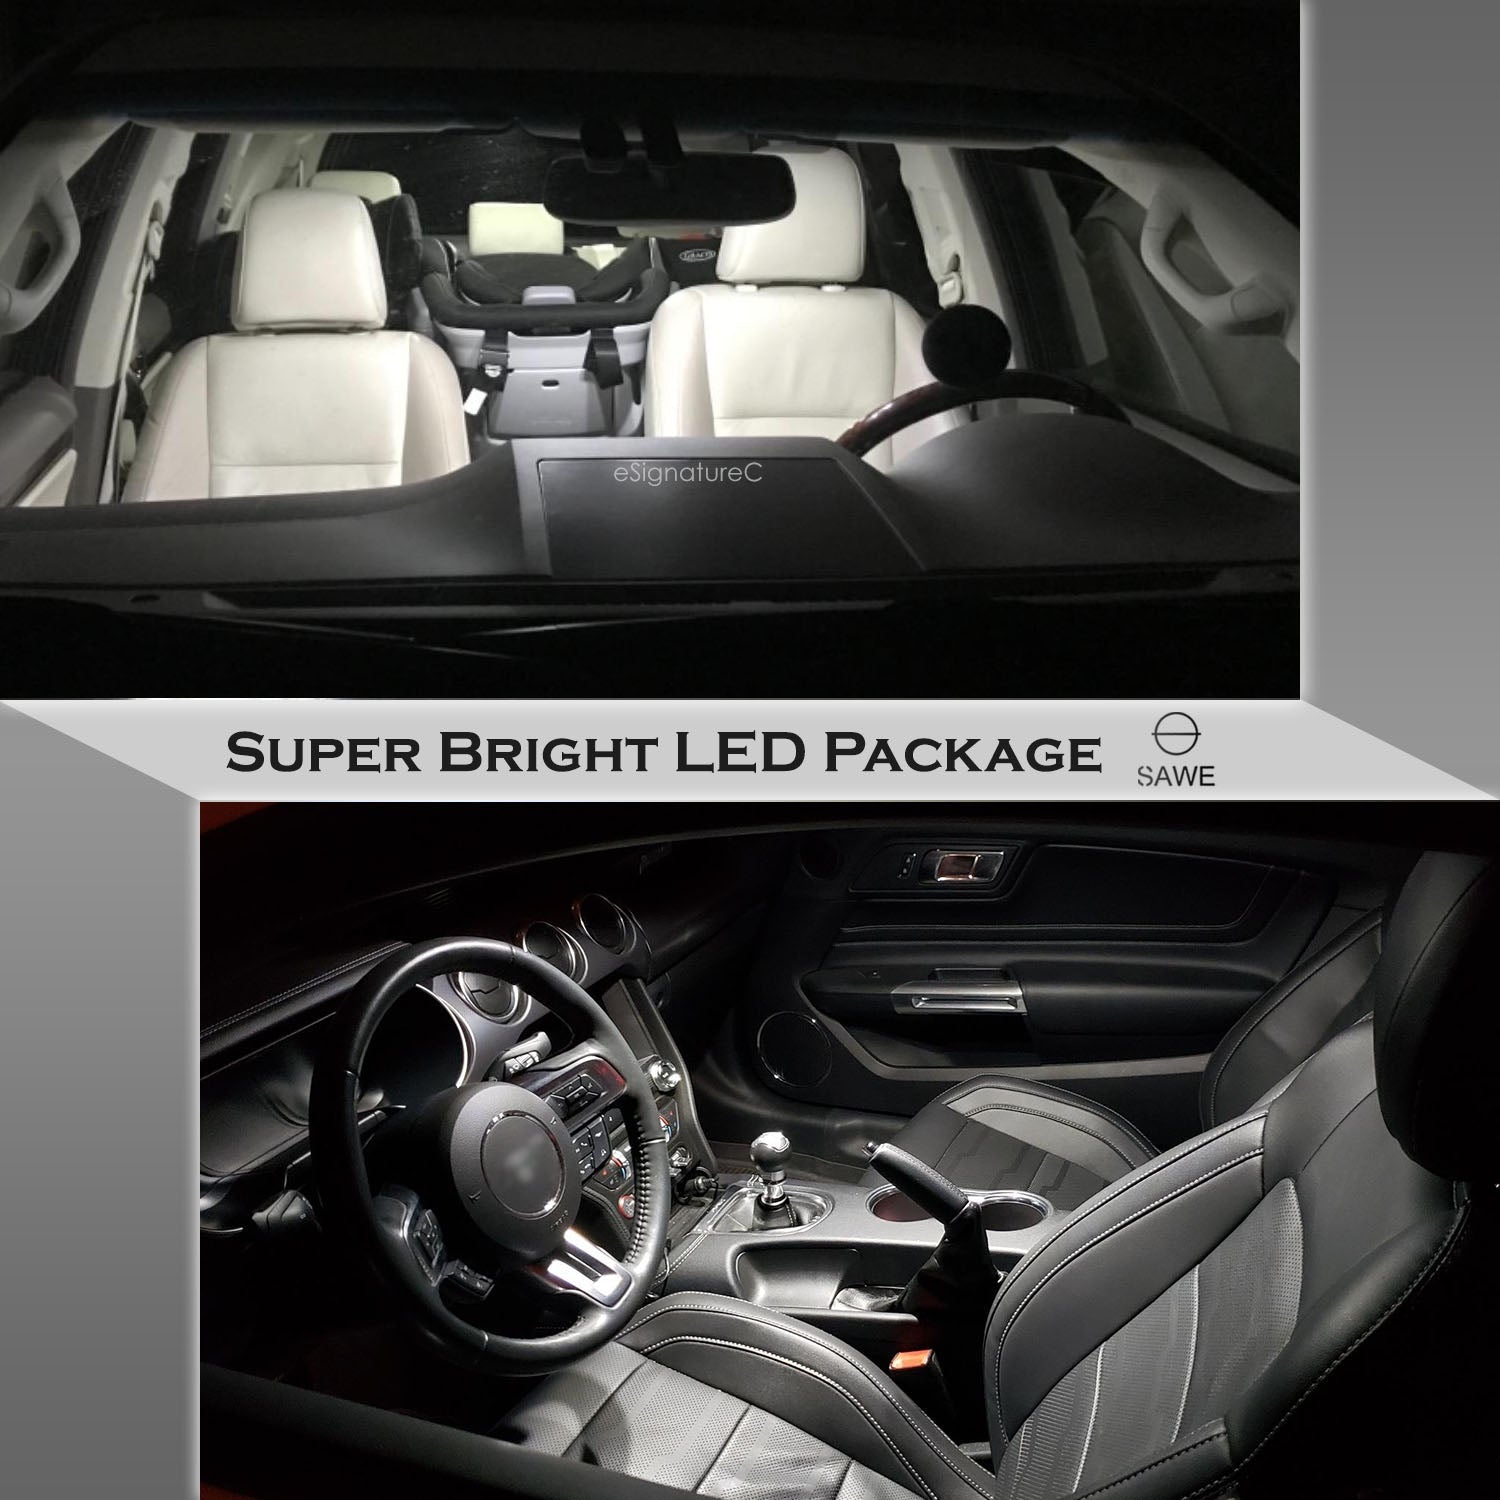 For Nissan Quest Interior LED Lights - Dome & Map Light Bulbs Package Kit for 2004 - 2009 - White